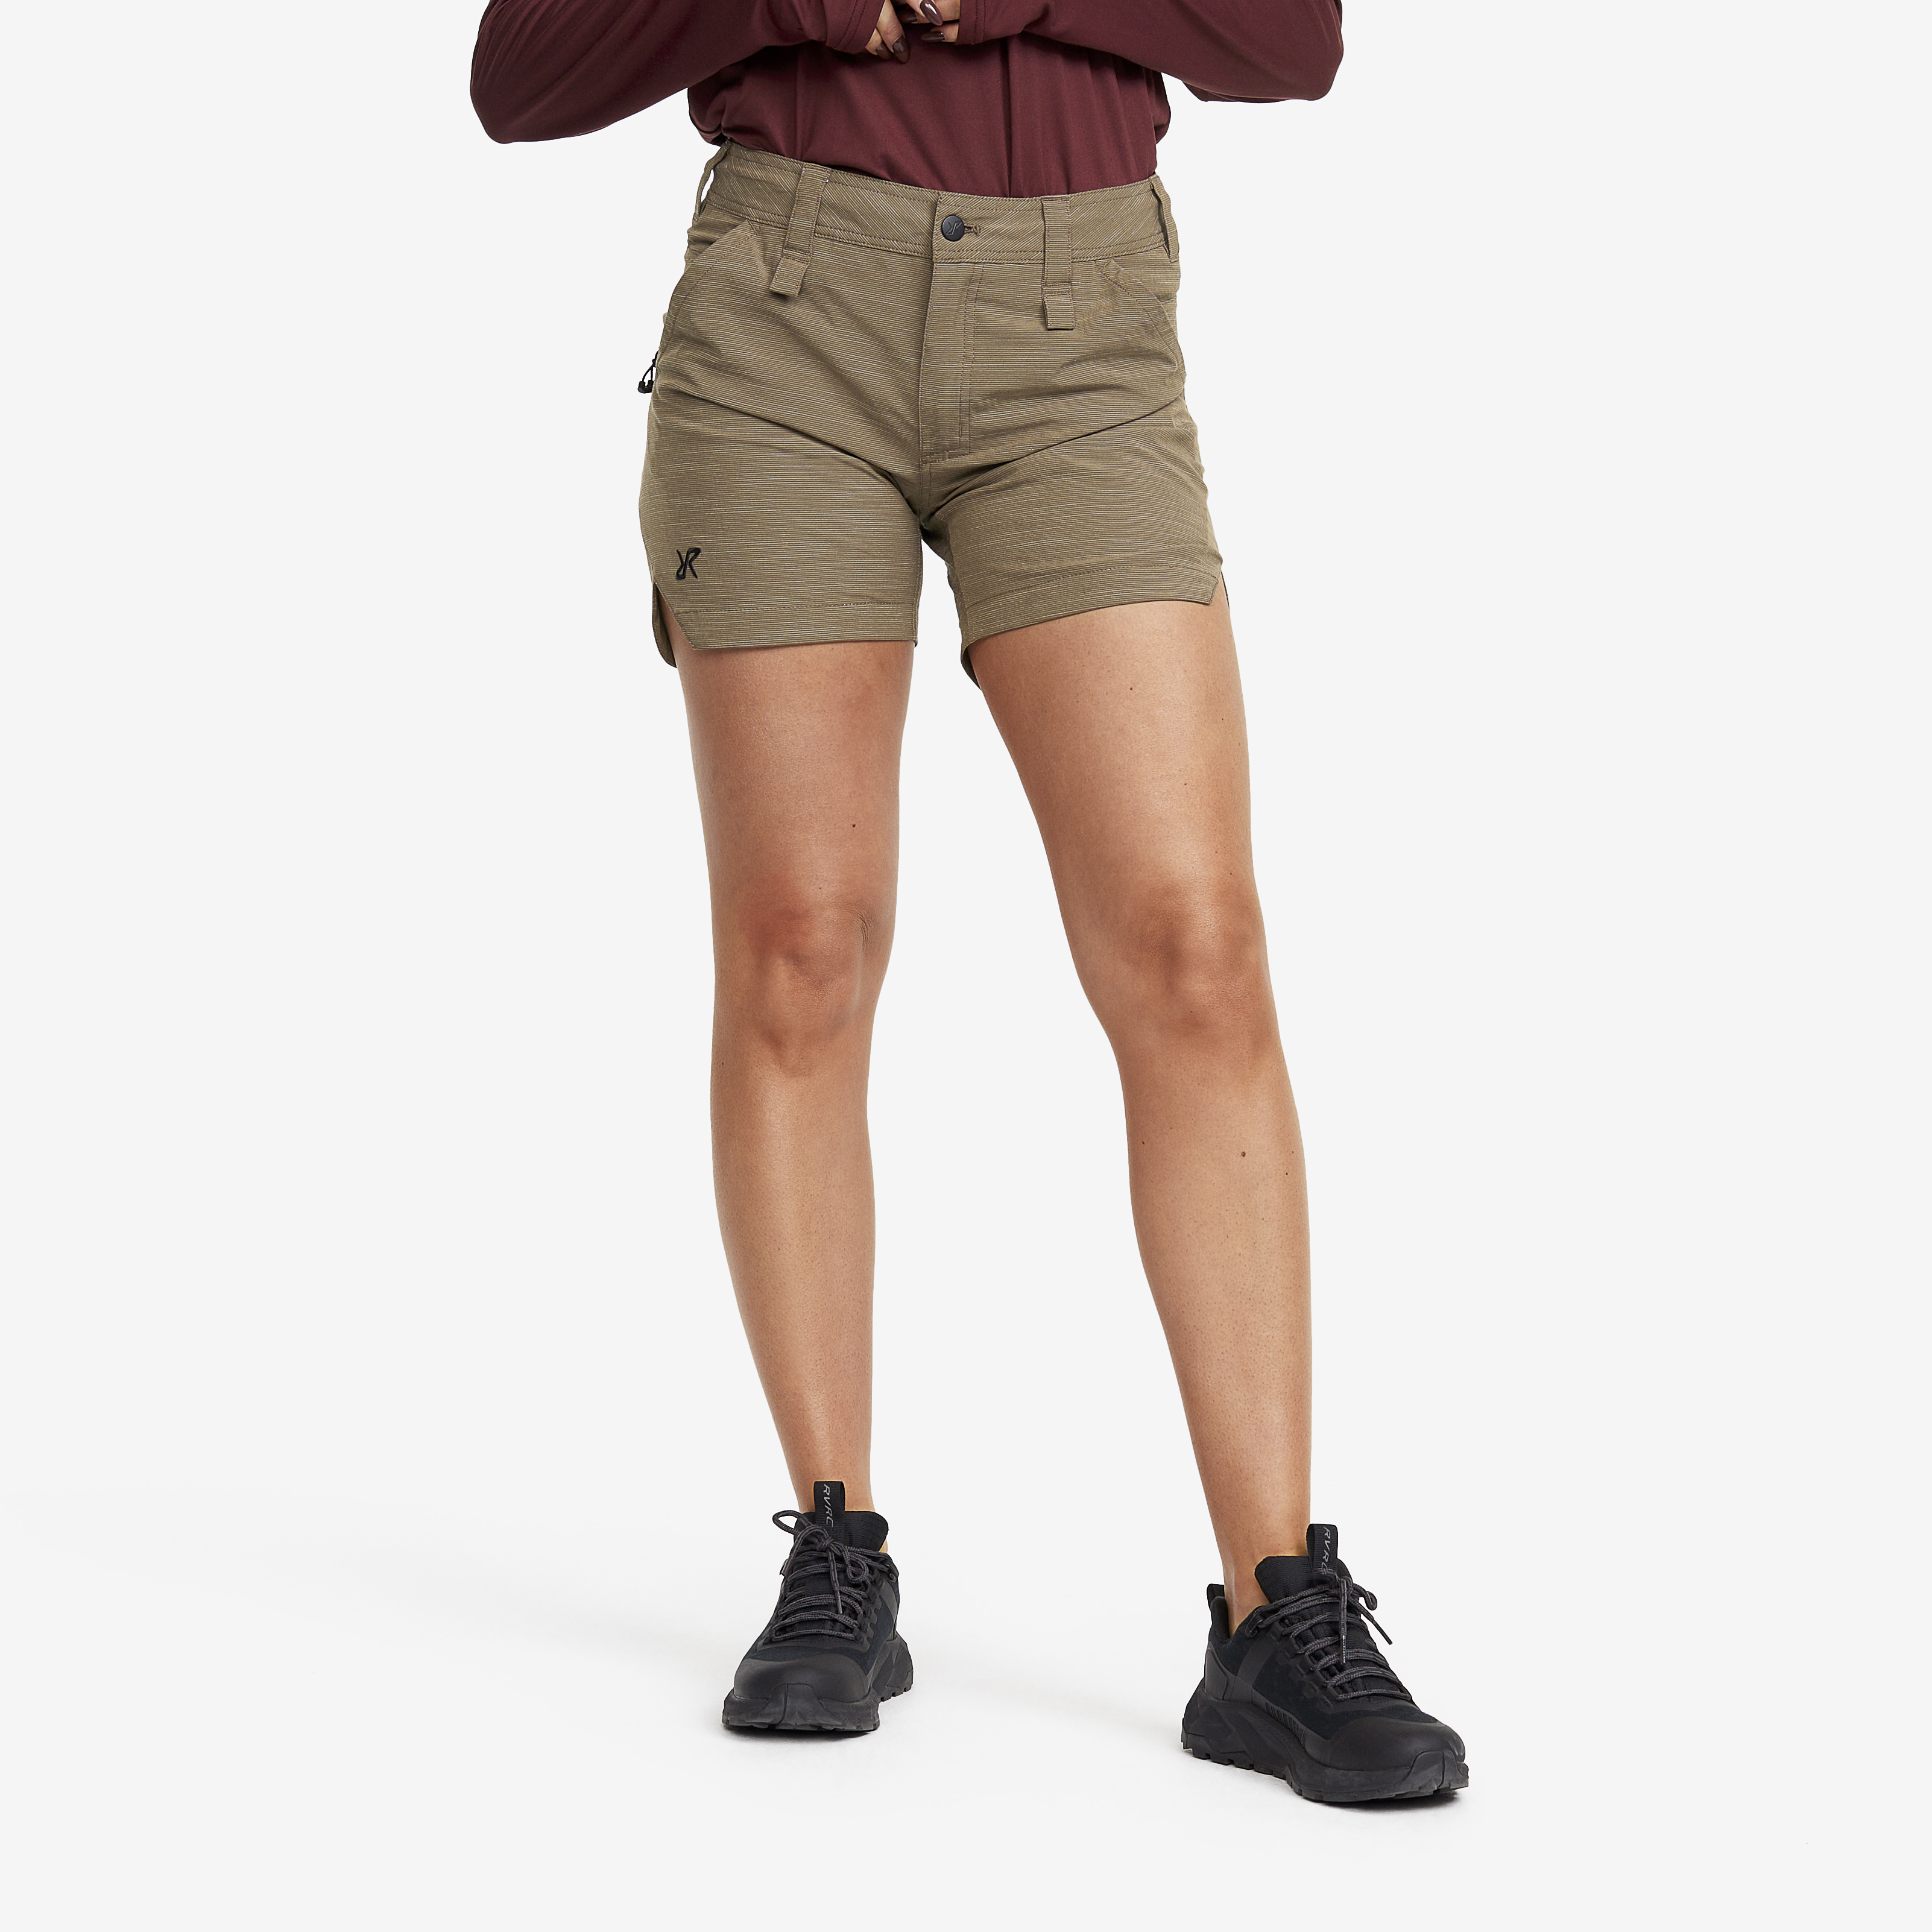 Hike & Dive Shorts Chocolate Chip Femme